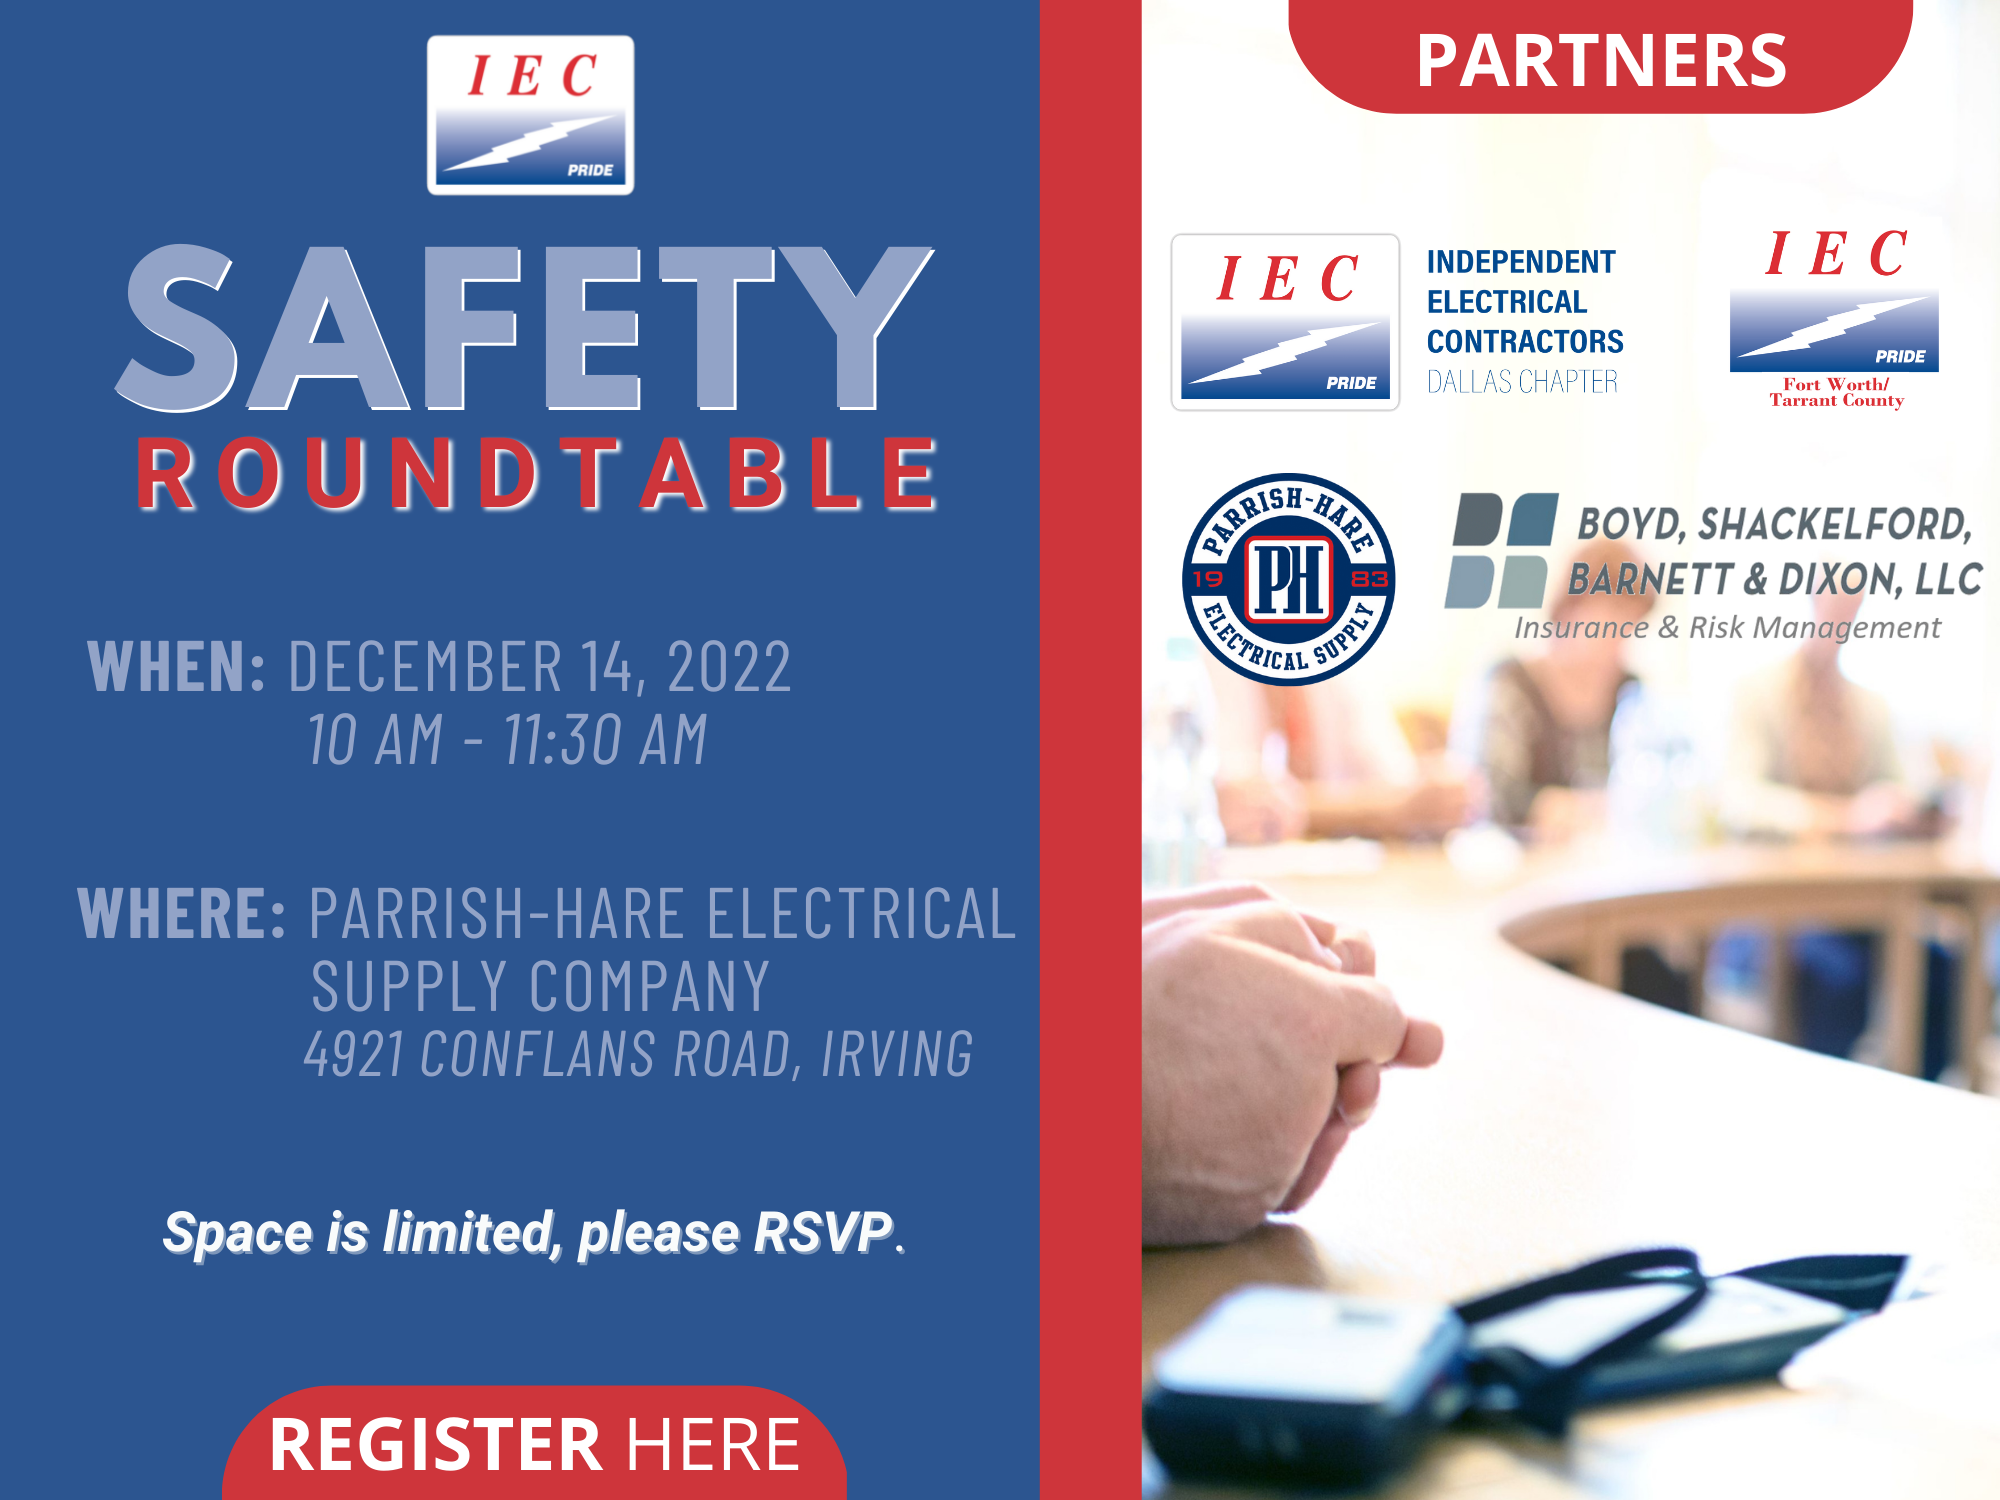 IEC Safety Roundtable 12/14/22